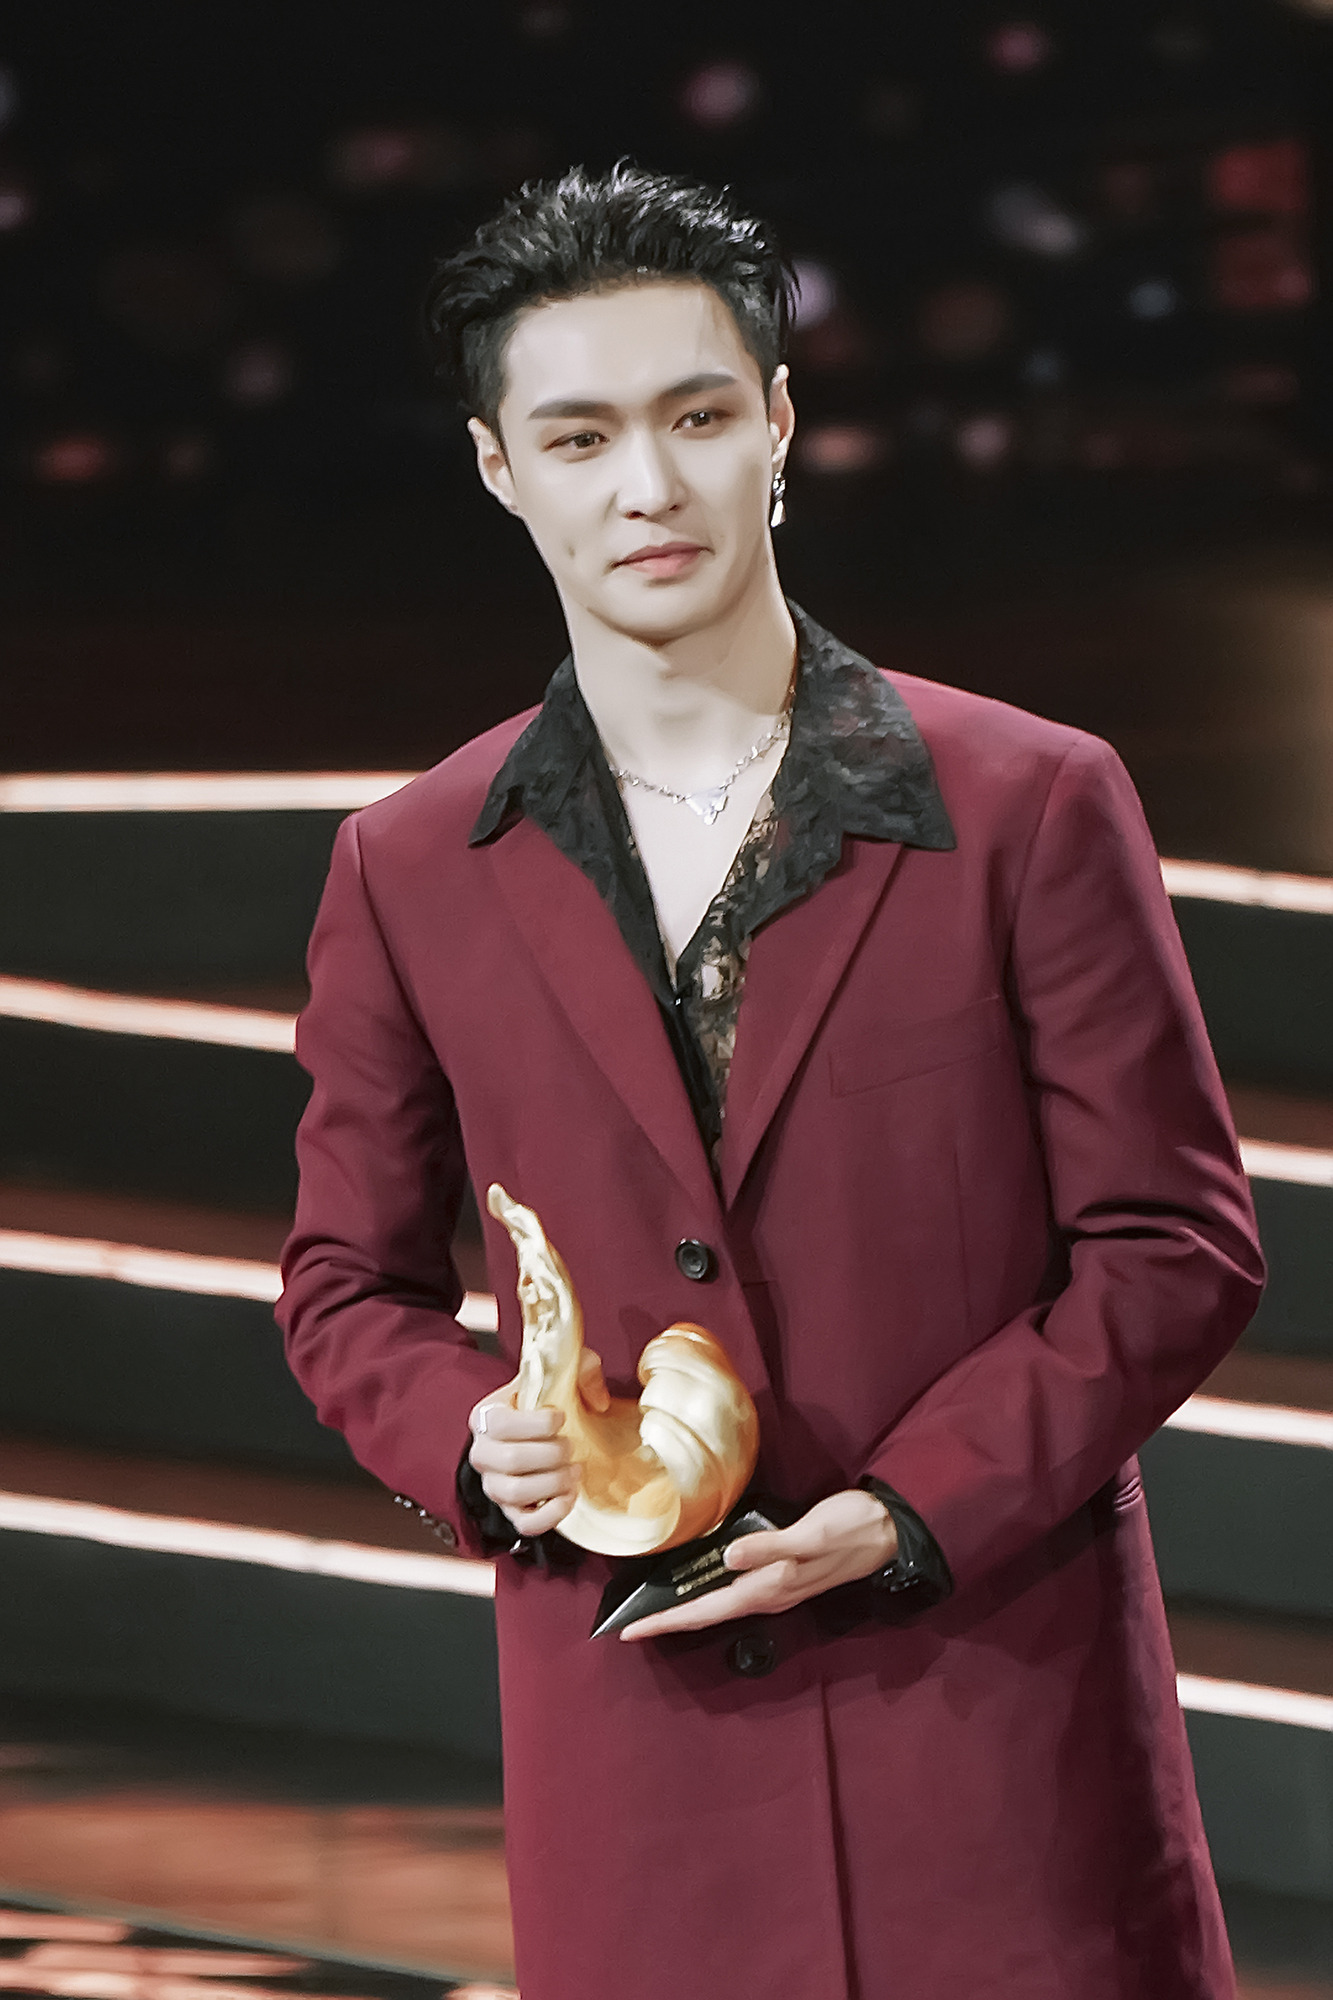 Seoul = EXO Lay (a member of SM Entertainment) swept China awards in the new year.Lay attended the 2019 Weibo Night (2019) held at the Beijing Water Cube on January 11 (local time), won the Best Producer of the Year Award and the Nam Shin of the Year award, and won two gold medals.The 2019 Weibo Night, which marks its 10th anniversary, is an award sponsored by Chinas largest SNS Weibo, which invites a star who has been hot for a year. Lay has been selected as a winner in 2019 for his outstanding production skills, visuals, popularity, and topics.In addition, Lay received the All-Star of the Year award at the 2019 ByteDance Year Festival (2019) held at the Beijing Cadillac Arena on the 8th (local time), and the ending stage was spectacularly decorated with the hit song NAMANA (Namana), which received a heated response from more than 5,000 viewers who visited the scene.The awards were hosted by ByteDance, which is serving video sharing application TikTok, and News Application Jinrtouo, and were awarded with excellent characters and contents that are outstanding in popular culture based on big data in the ByteDance platform.As a result, Lay was three-time king of 2019 Tencent Music Entertainment Awards held in December last year, followed by the 2nd prize of 2020 Aichi Night of the Shout, the 2nd prize of 2019 Weibo Night and the 2019 ByteDance Yearbook award, total 8 gold medals were recorded at the China Year-end Awards, proving explosive popularity and high status in the local area.